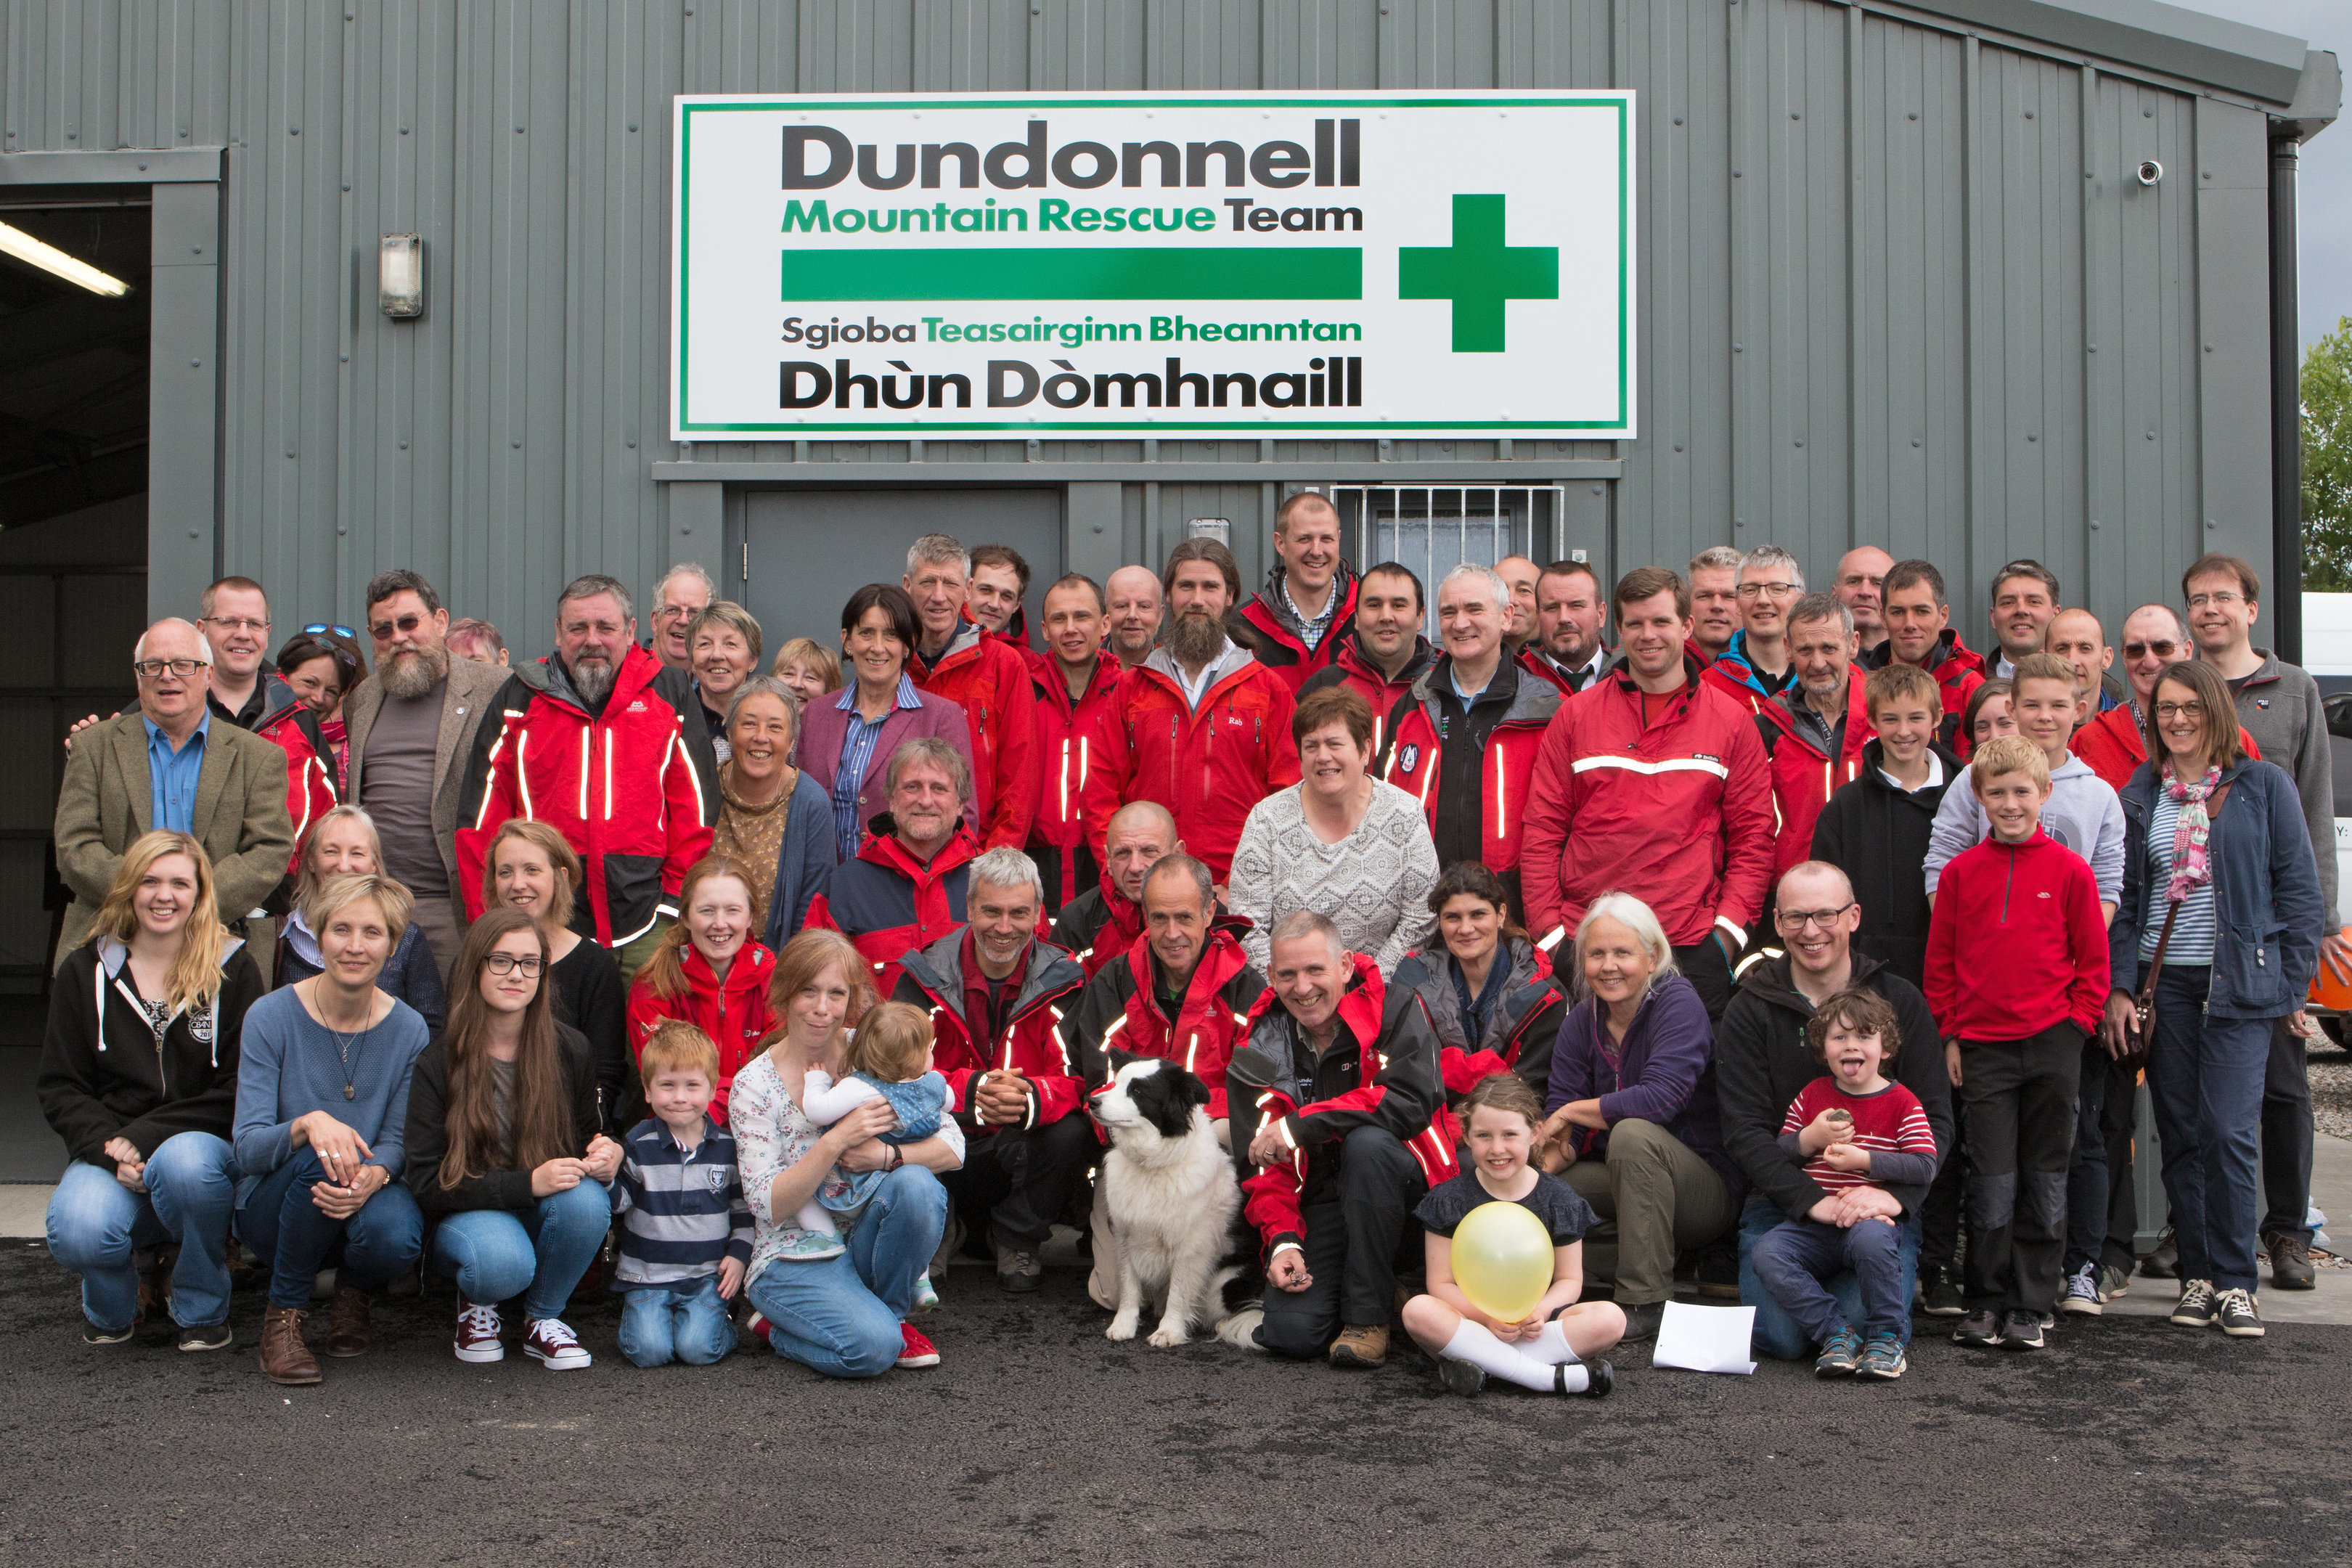 Dundonnell MRT at their new base in Dingwall